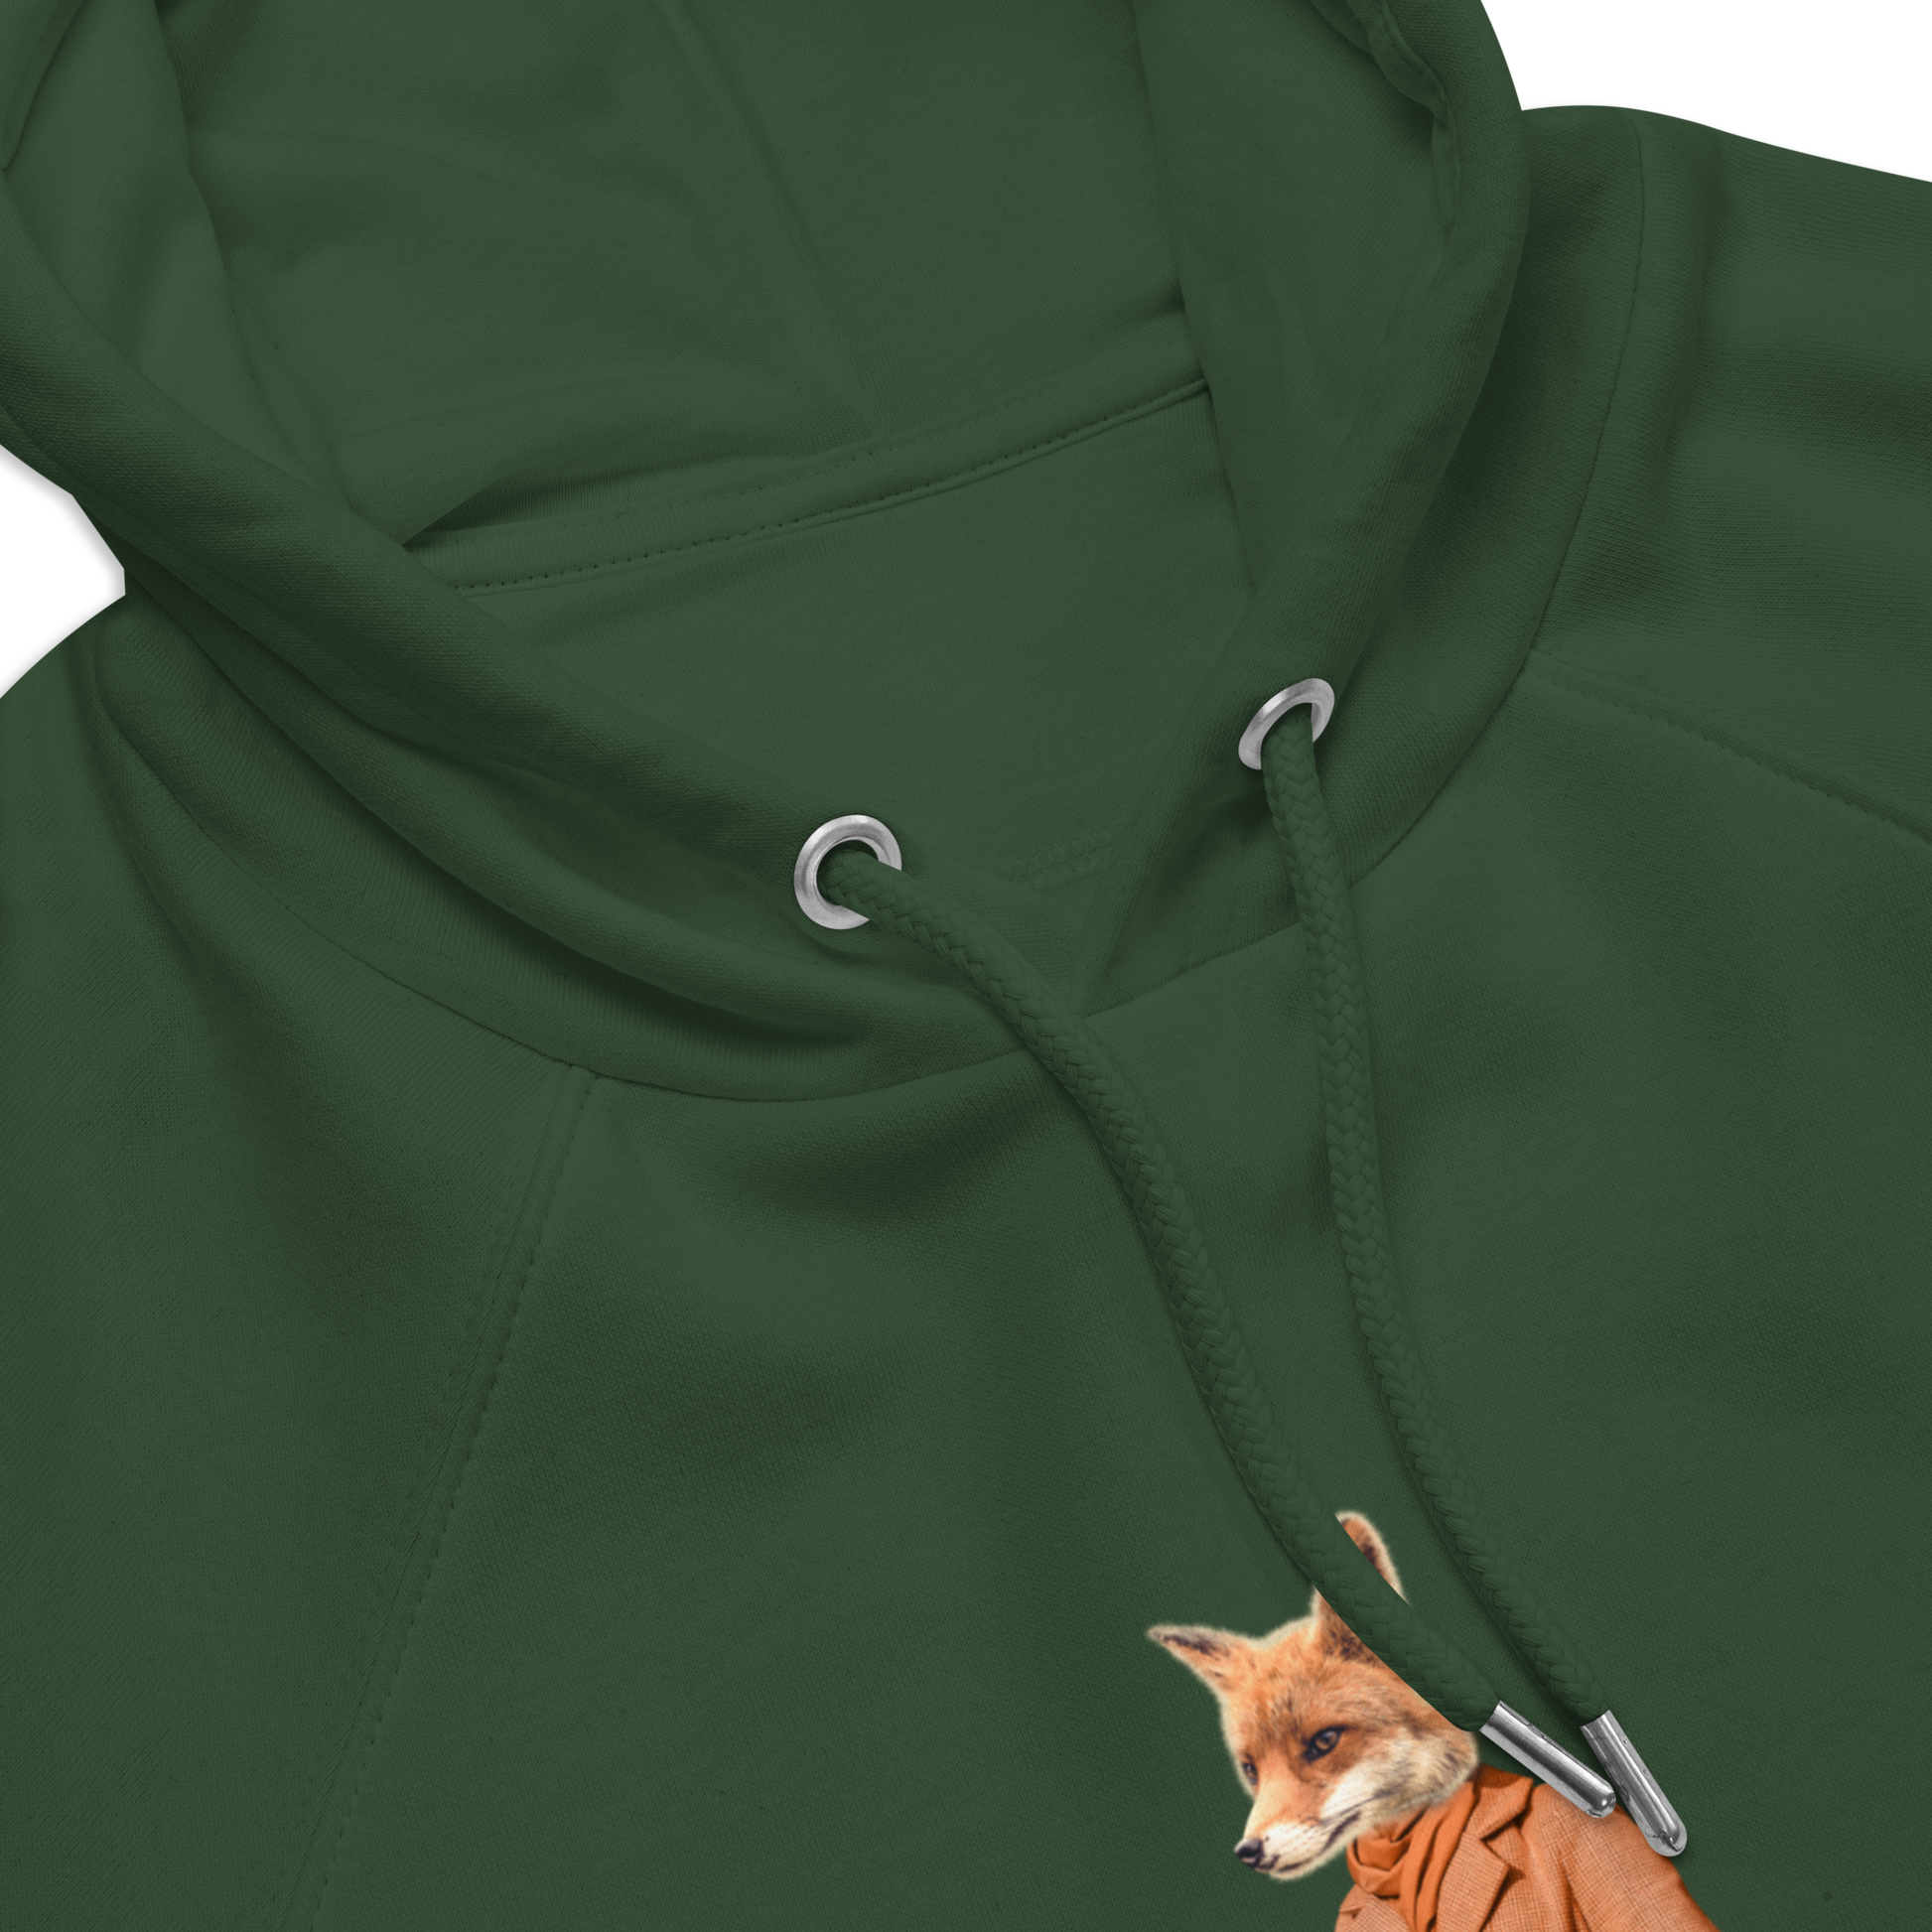 Front Details of a Bottle Green Anthropomorphic Fox Raglan Hoodie featuring a sly Anthropomorphic Fox in a Trench Coat graphic on the chest - Funny Graphic Fox Hoodies - Boozy Fox